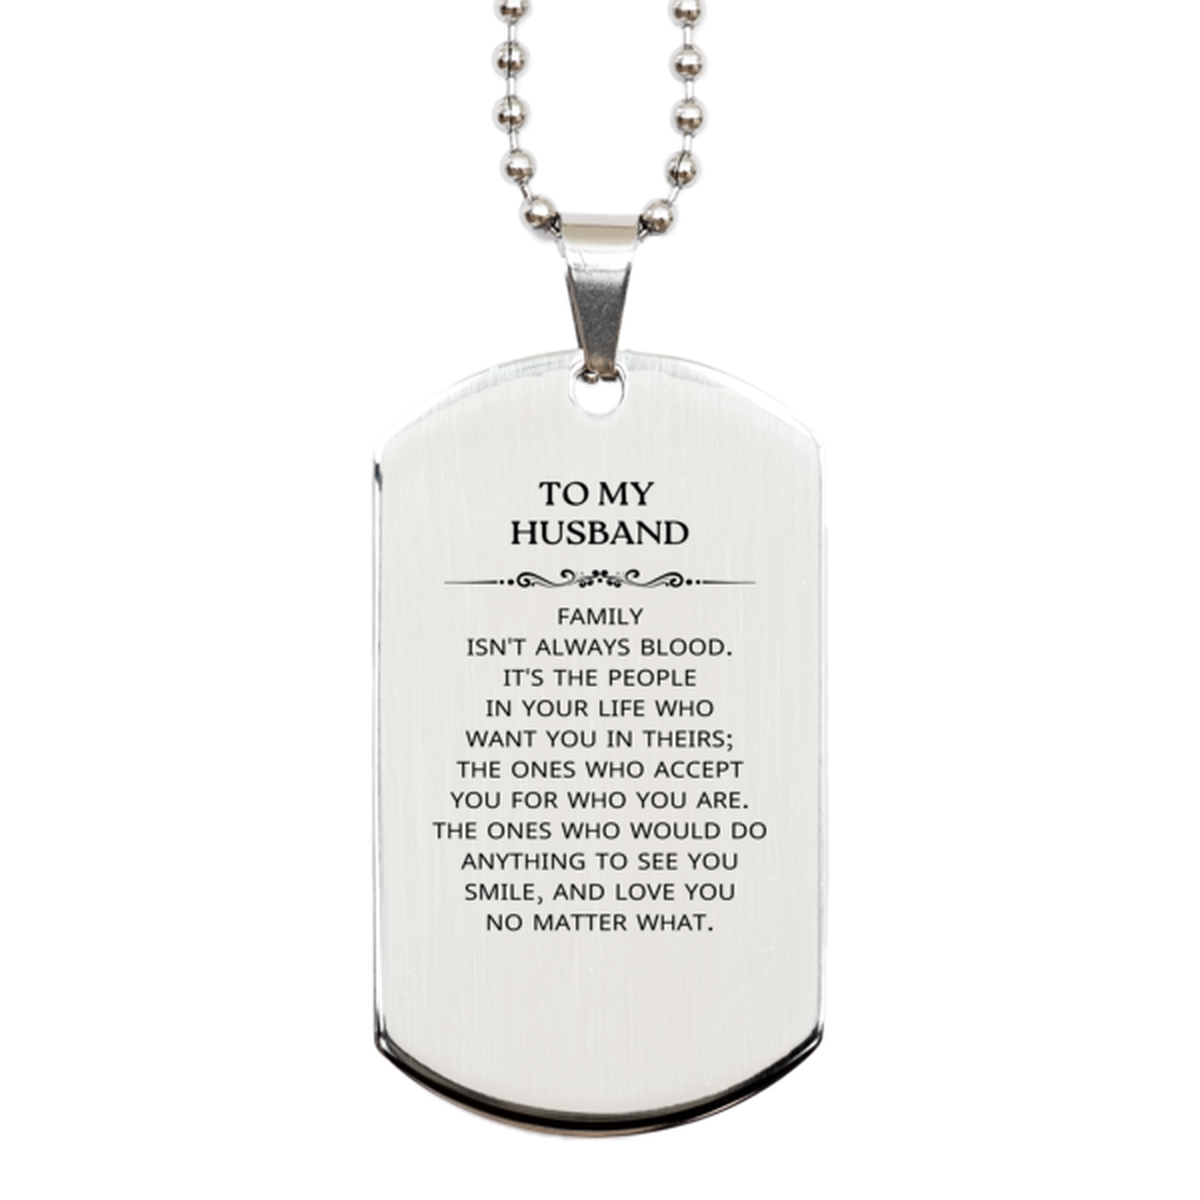 To My Husband Gifts, Family isn't always blood, Husband Silver Dog Tag, Birthday Christmas Unique Present For Husband